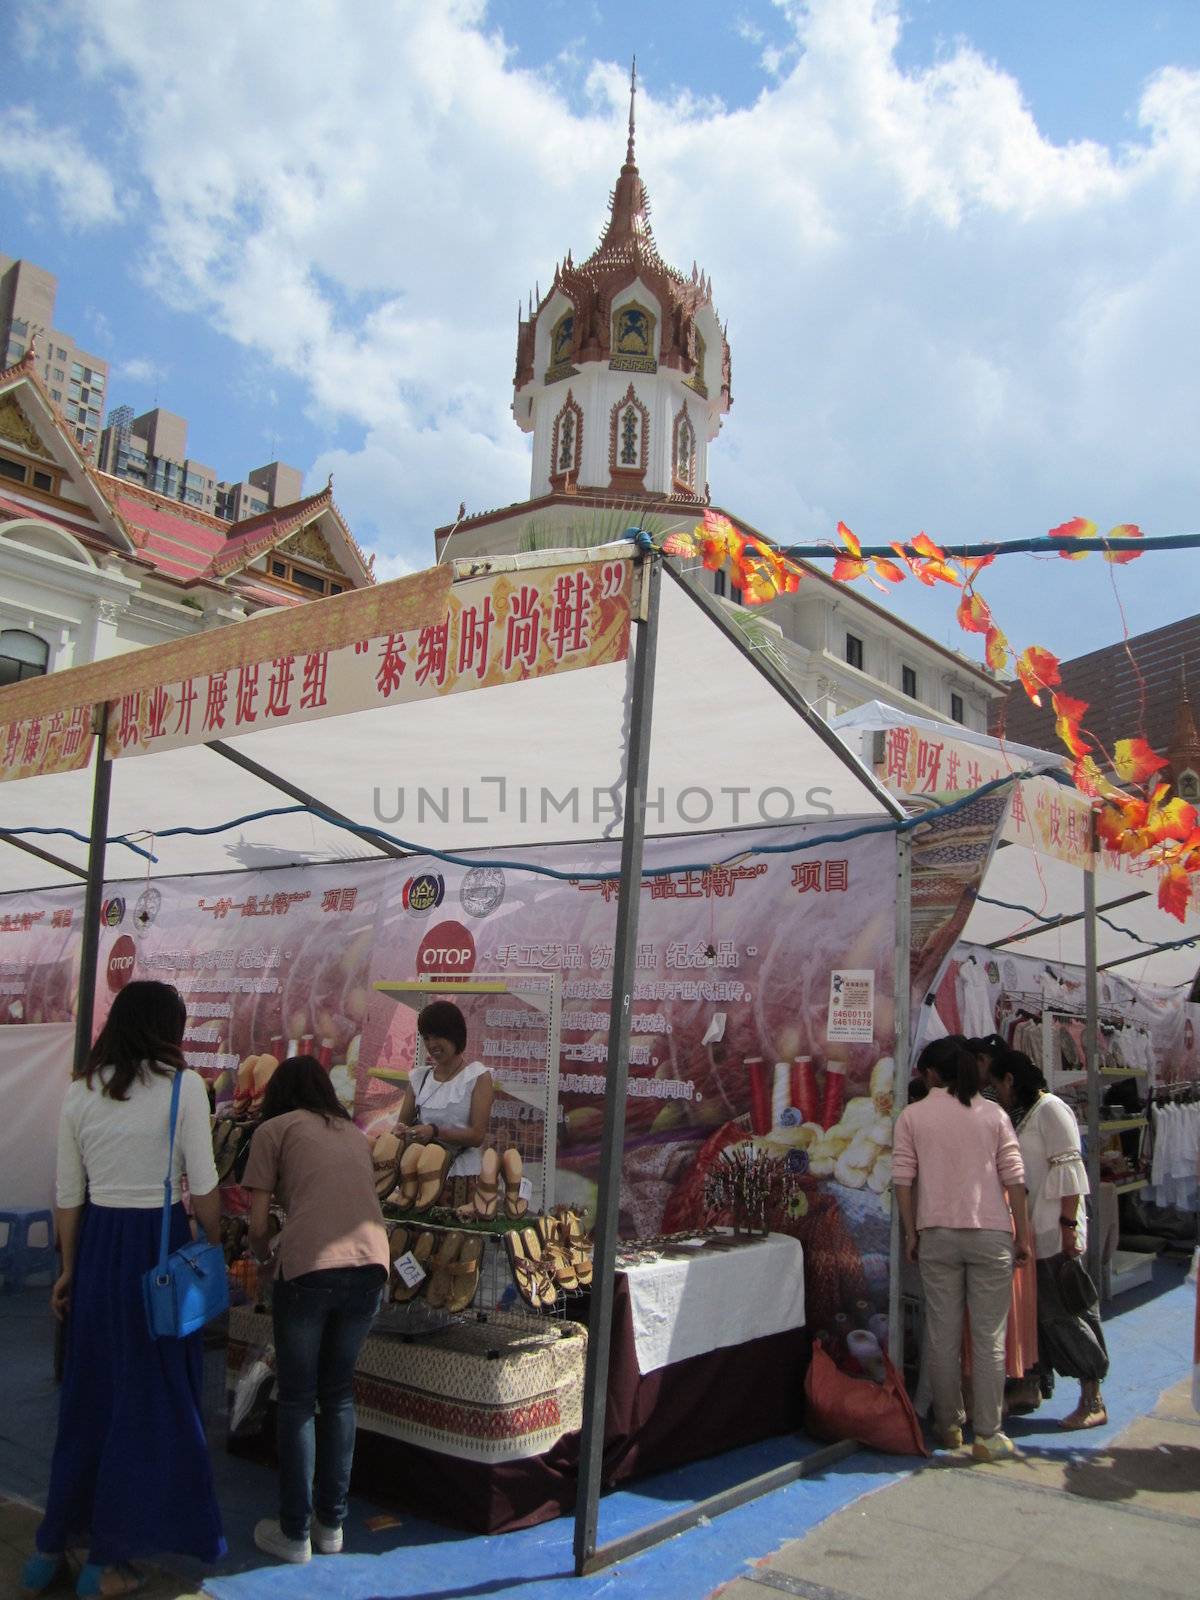 Thai festival in kunming, yunnan province, China